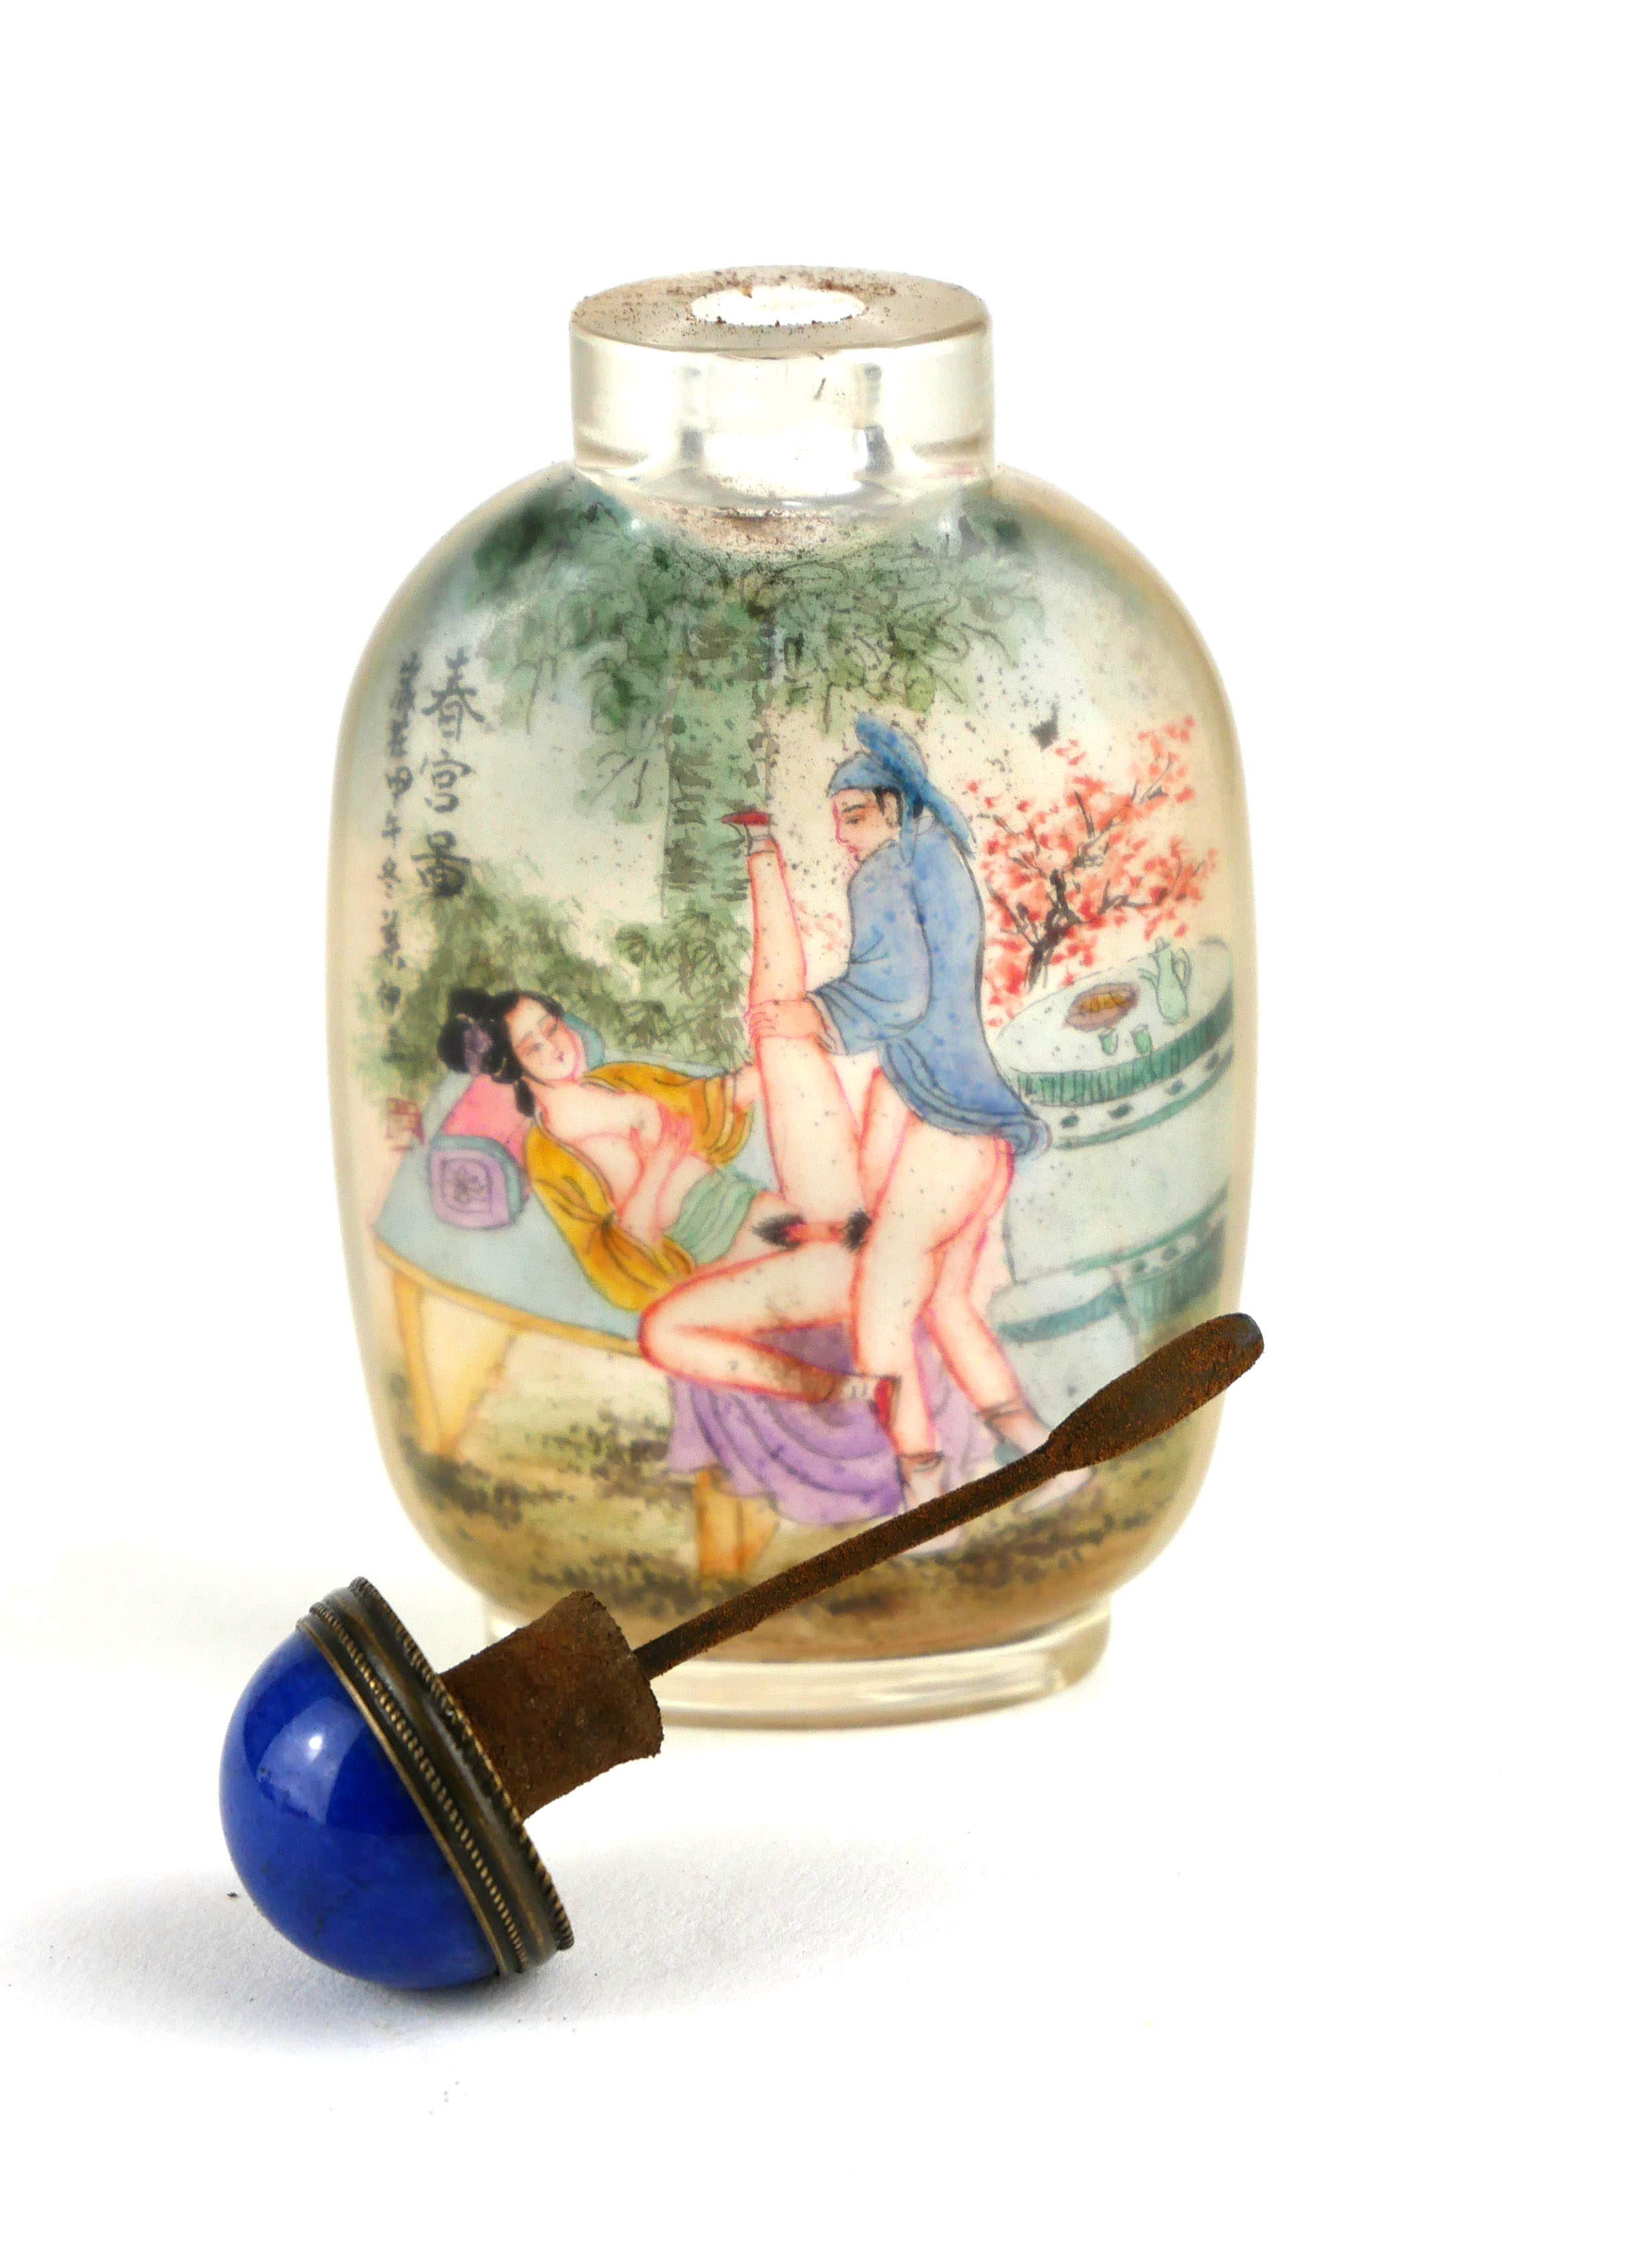 A CHINESE EROTIC REVERSE PAINTED FROSTED GLASS AND LAPIS LAZULI SNUFF BOTTLE Having a cabochon cut - Image 3 of 3